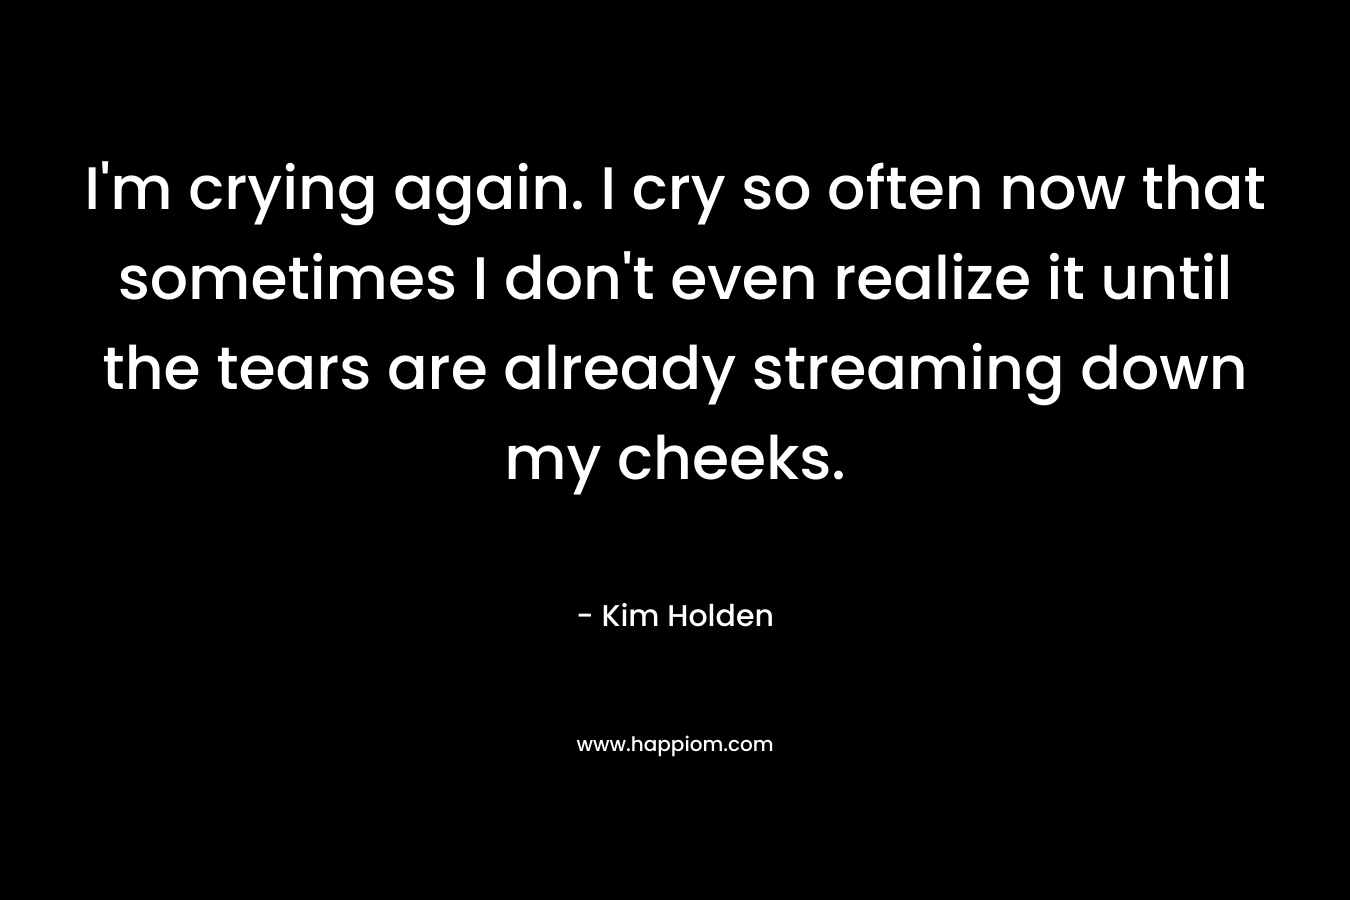 I’m crying again. I cry so often now that sometimes I don’t even realize it until the tears are already streaming down my cheeks. – Kim Holden